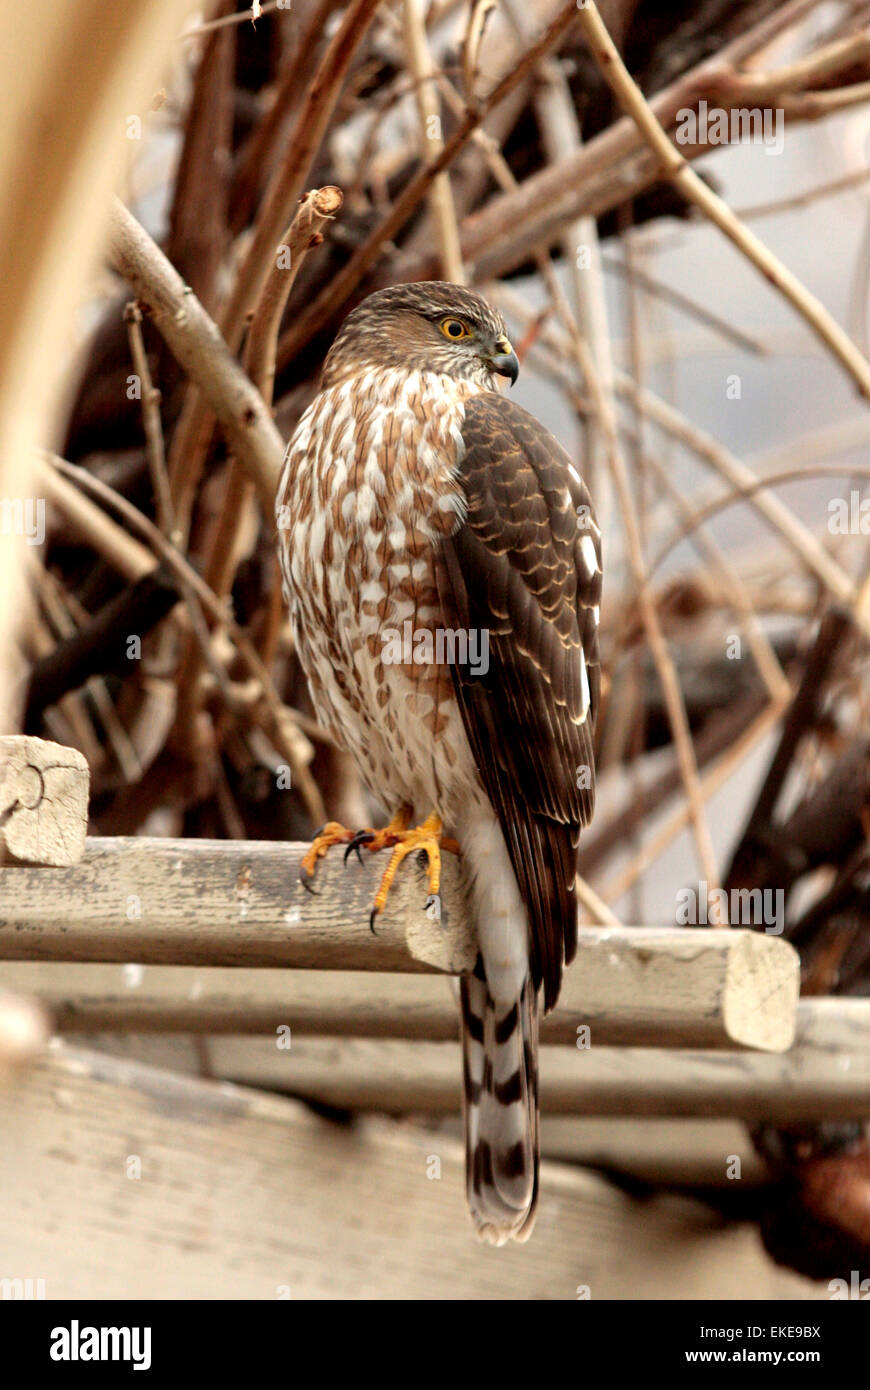 A small Coopers Hawk (Accipiter cooperii) waits near a bird feeder for its prey. Stock Photo